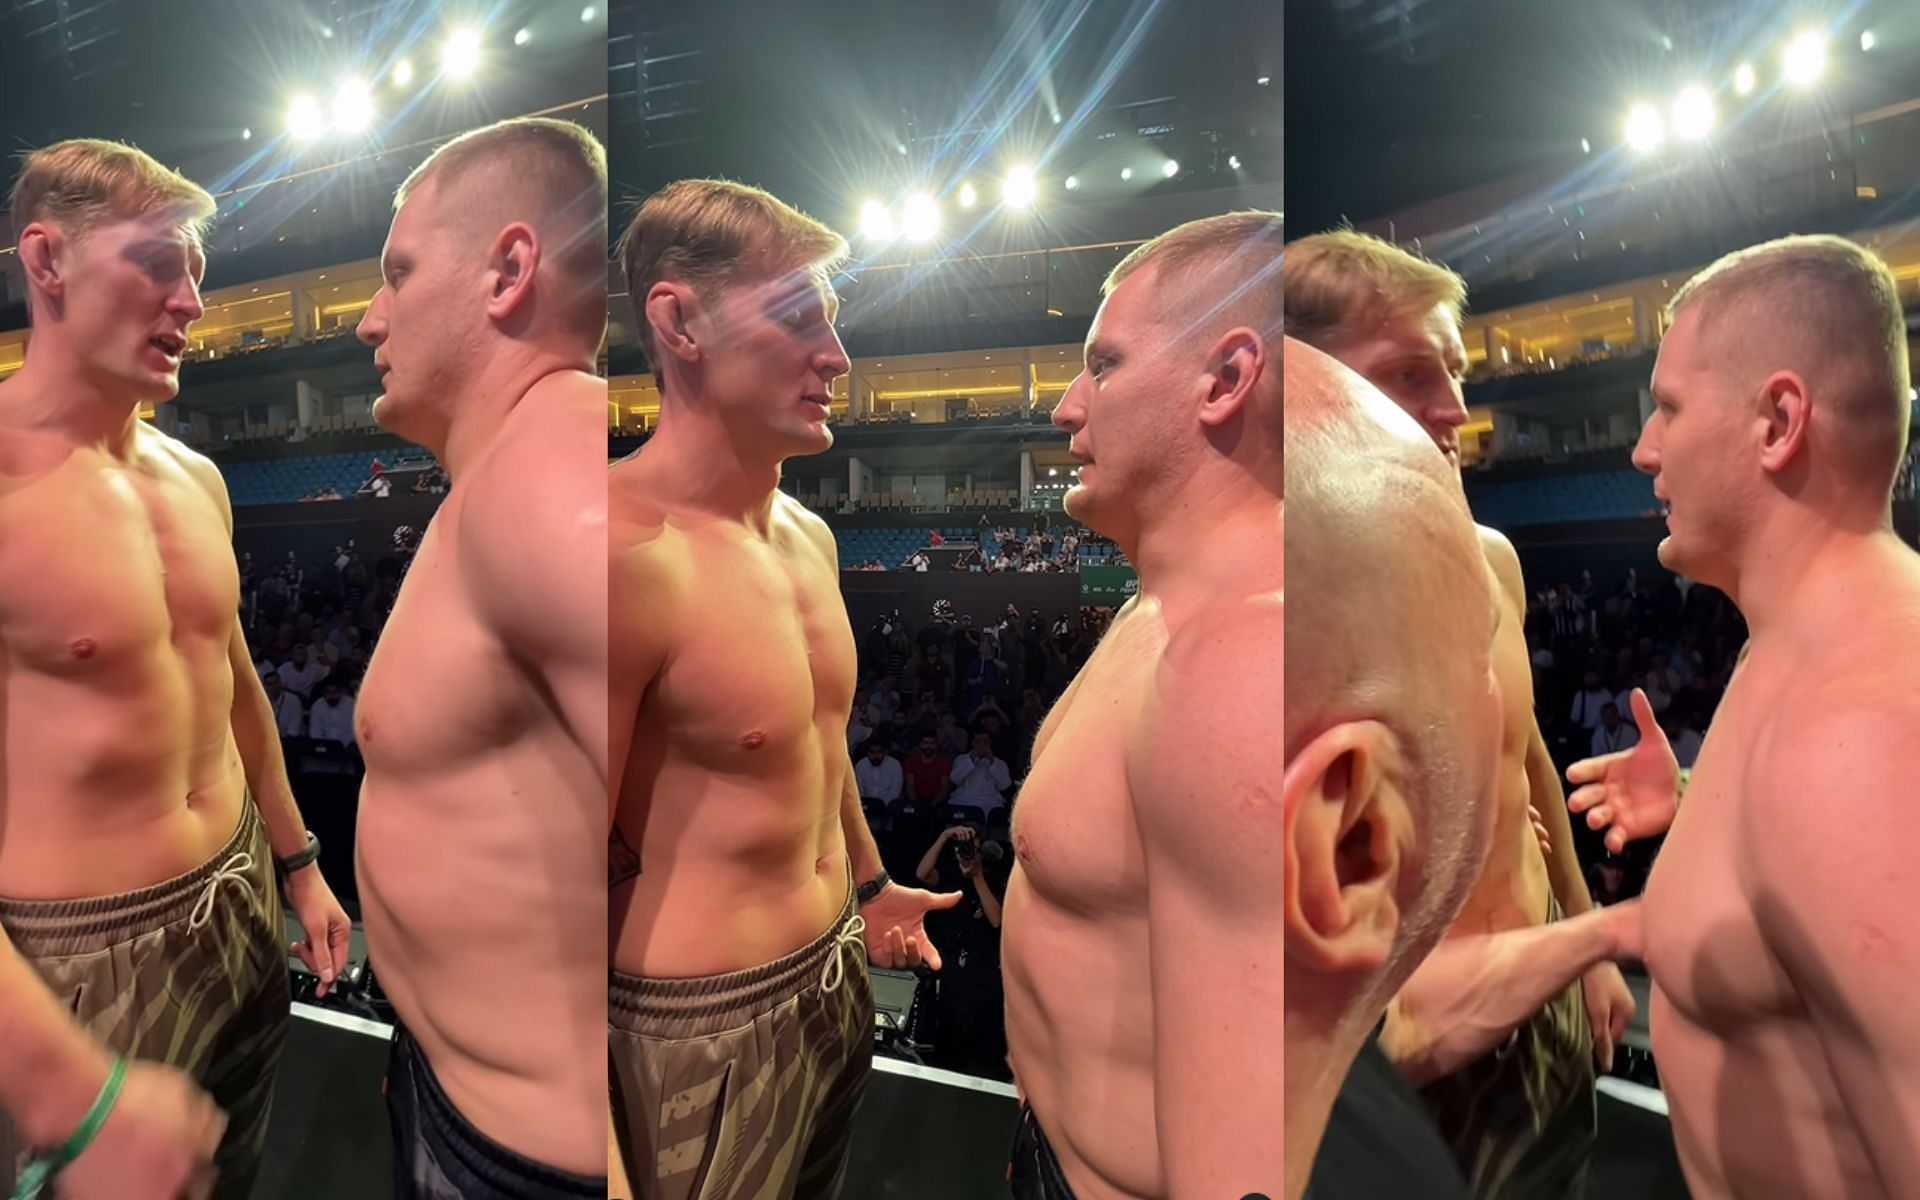 Footage of Alexander Volkov (left in pictures) sharing heated face-off with Sergei Pavlovich (right in pictures) [Images courtesy: @ufc on Instagram]